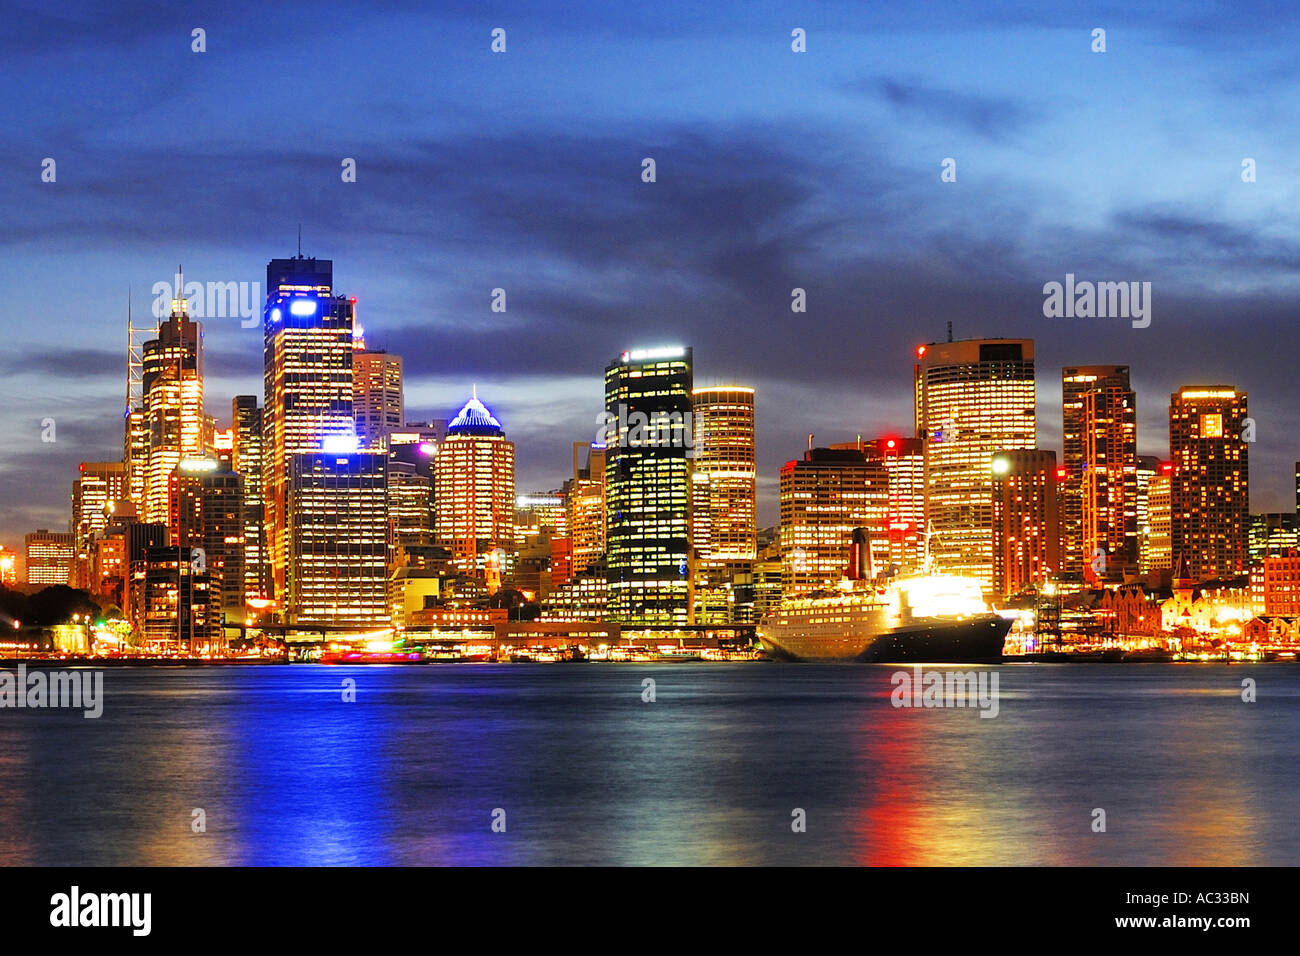 skyline of Sydney with Opera and cruise liner Queen Mary 2, Australia, New South Wales, Sydney Stock Photo